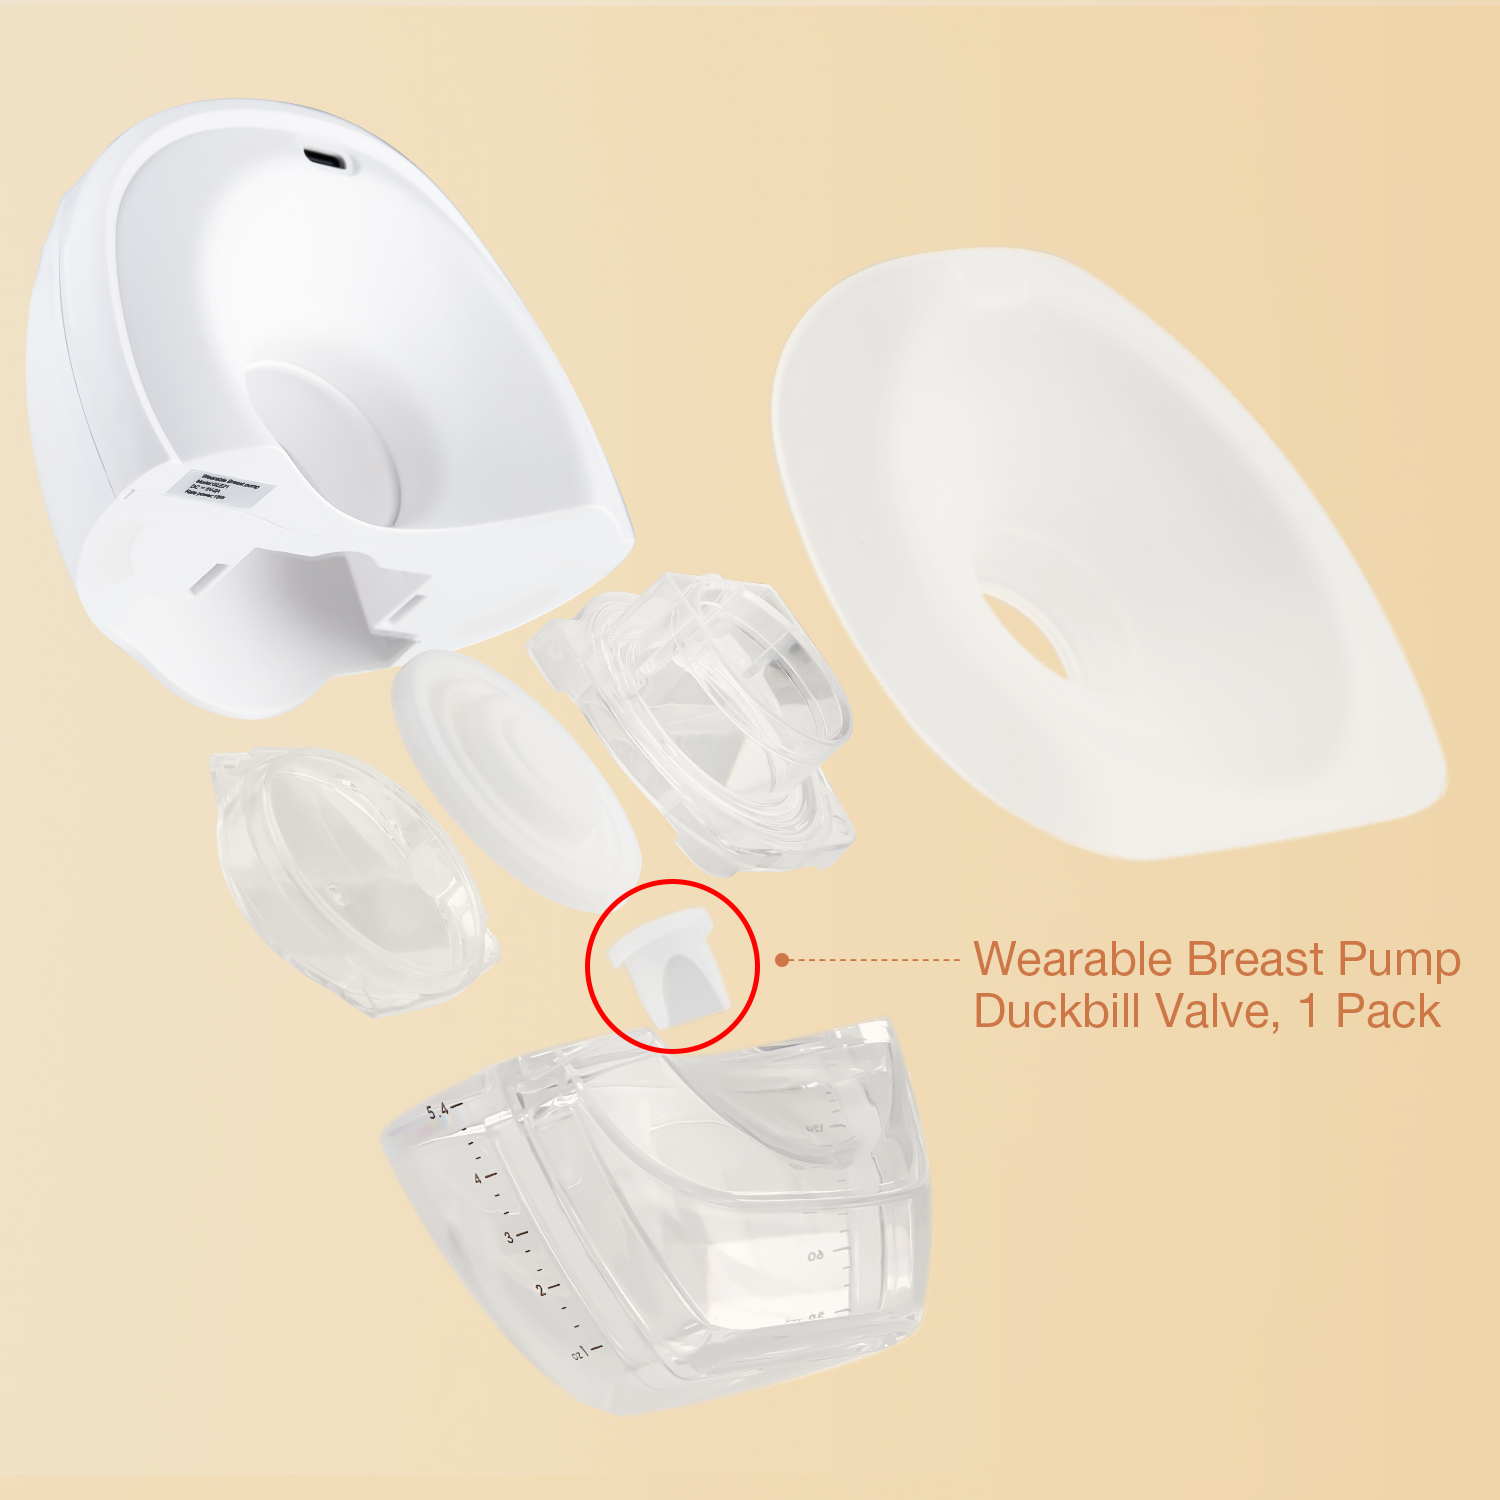 MISSAA Silicone Duckbill Valves Compatible With GLE21 Wearable Breast Pump, 1 Pack